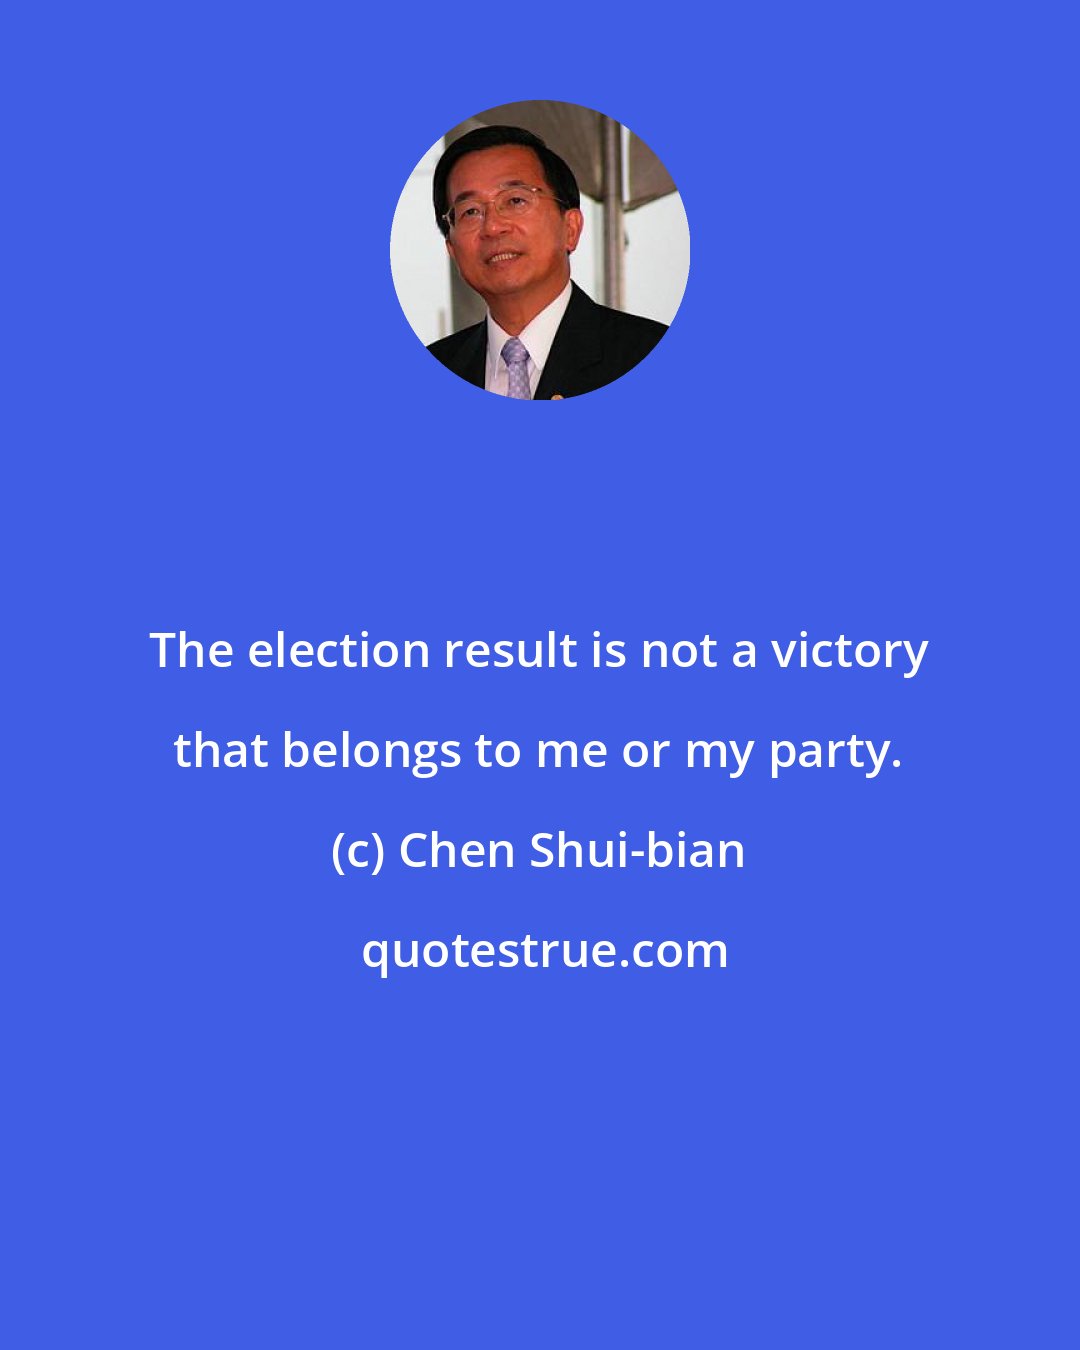 Chen Shui-bian: The election result is not a victory that belongs to me or my party.